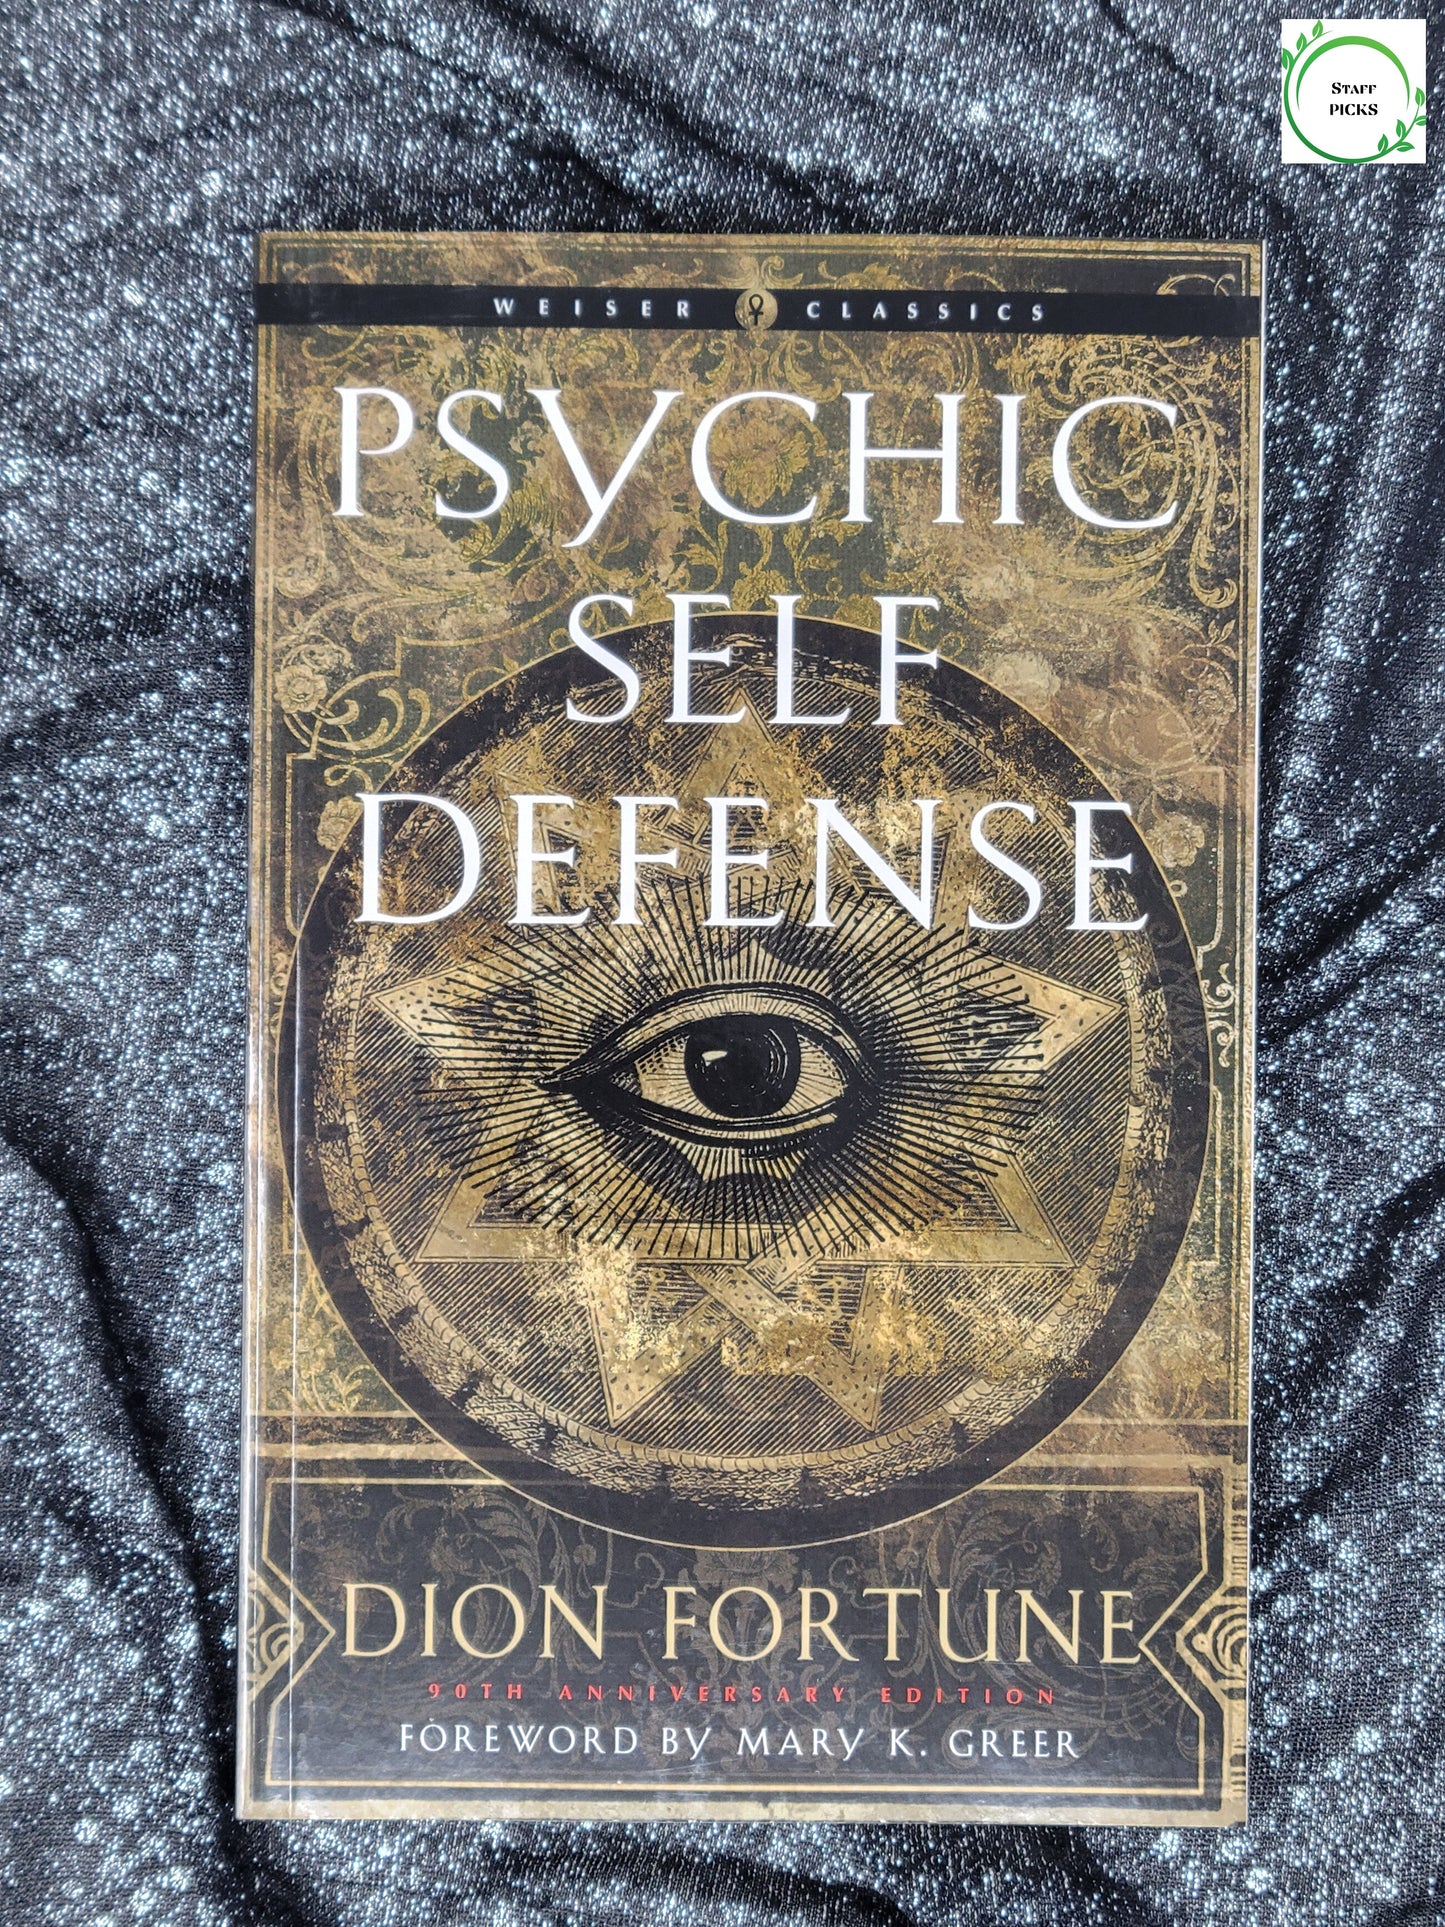 Psychic Self Defense (90th Anniversary Edition) by Dion Fortune